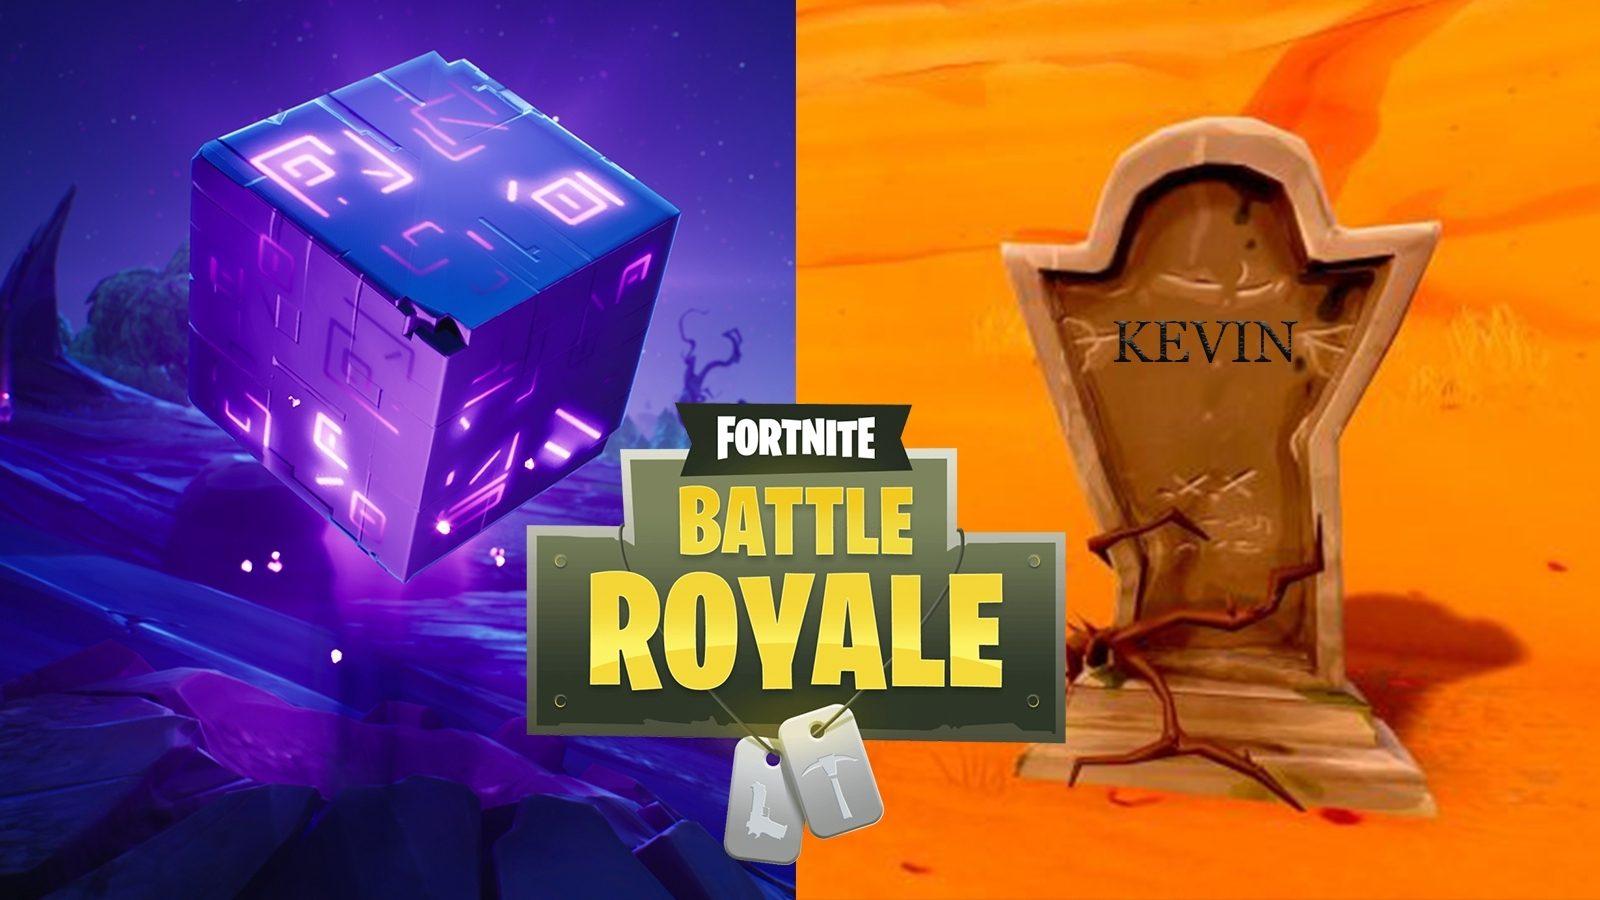 This Fortnite concept skin celebrates Kevin the Cube's final moments